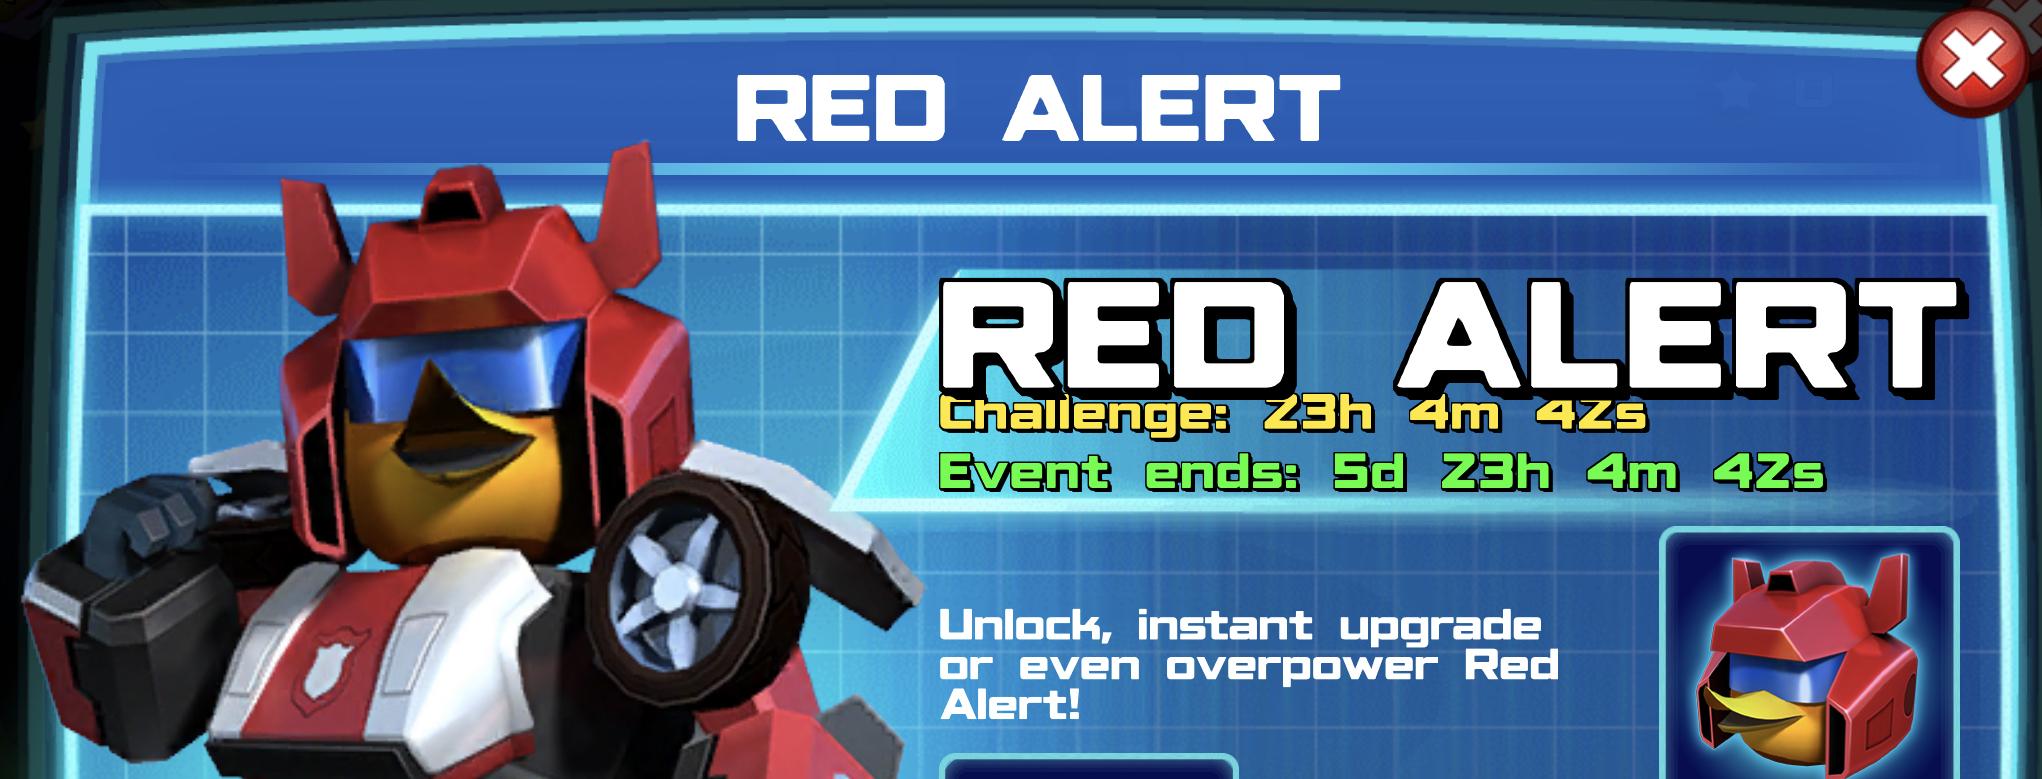 The event banner for Red Alert